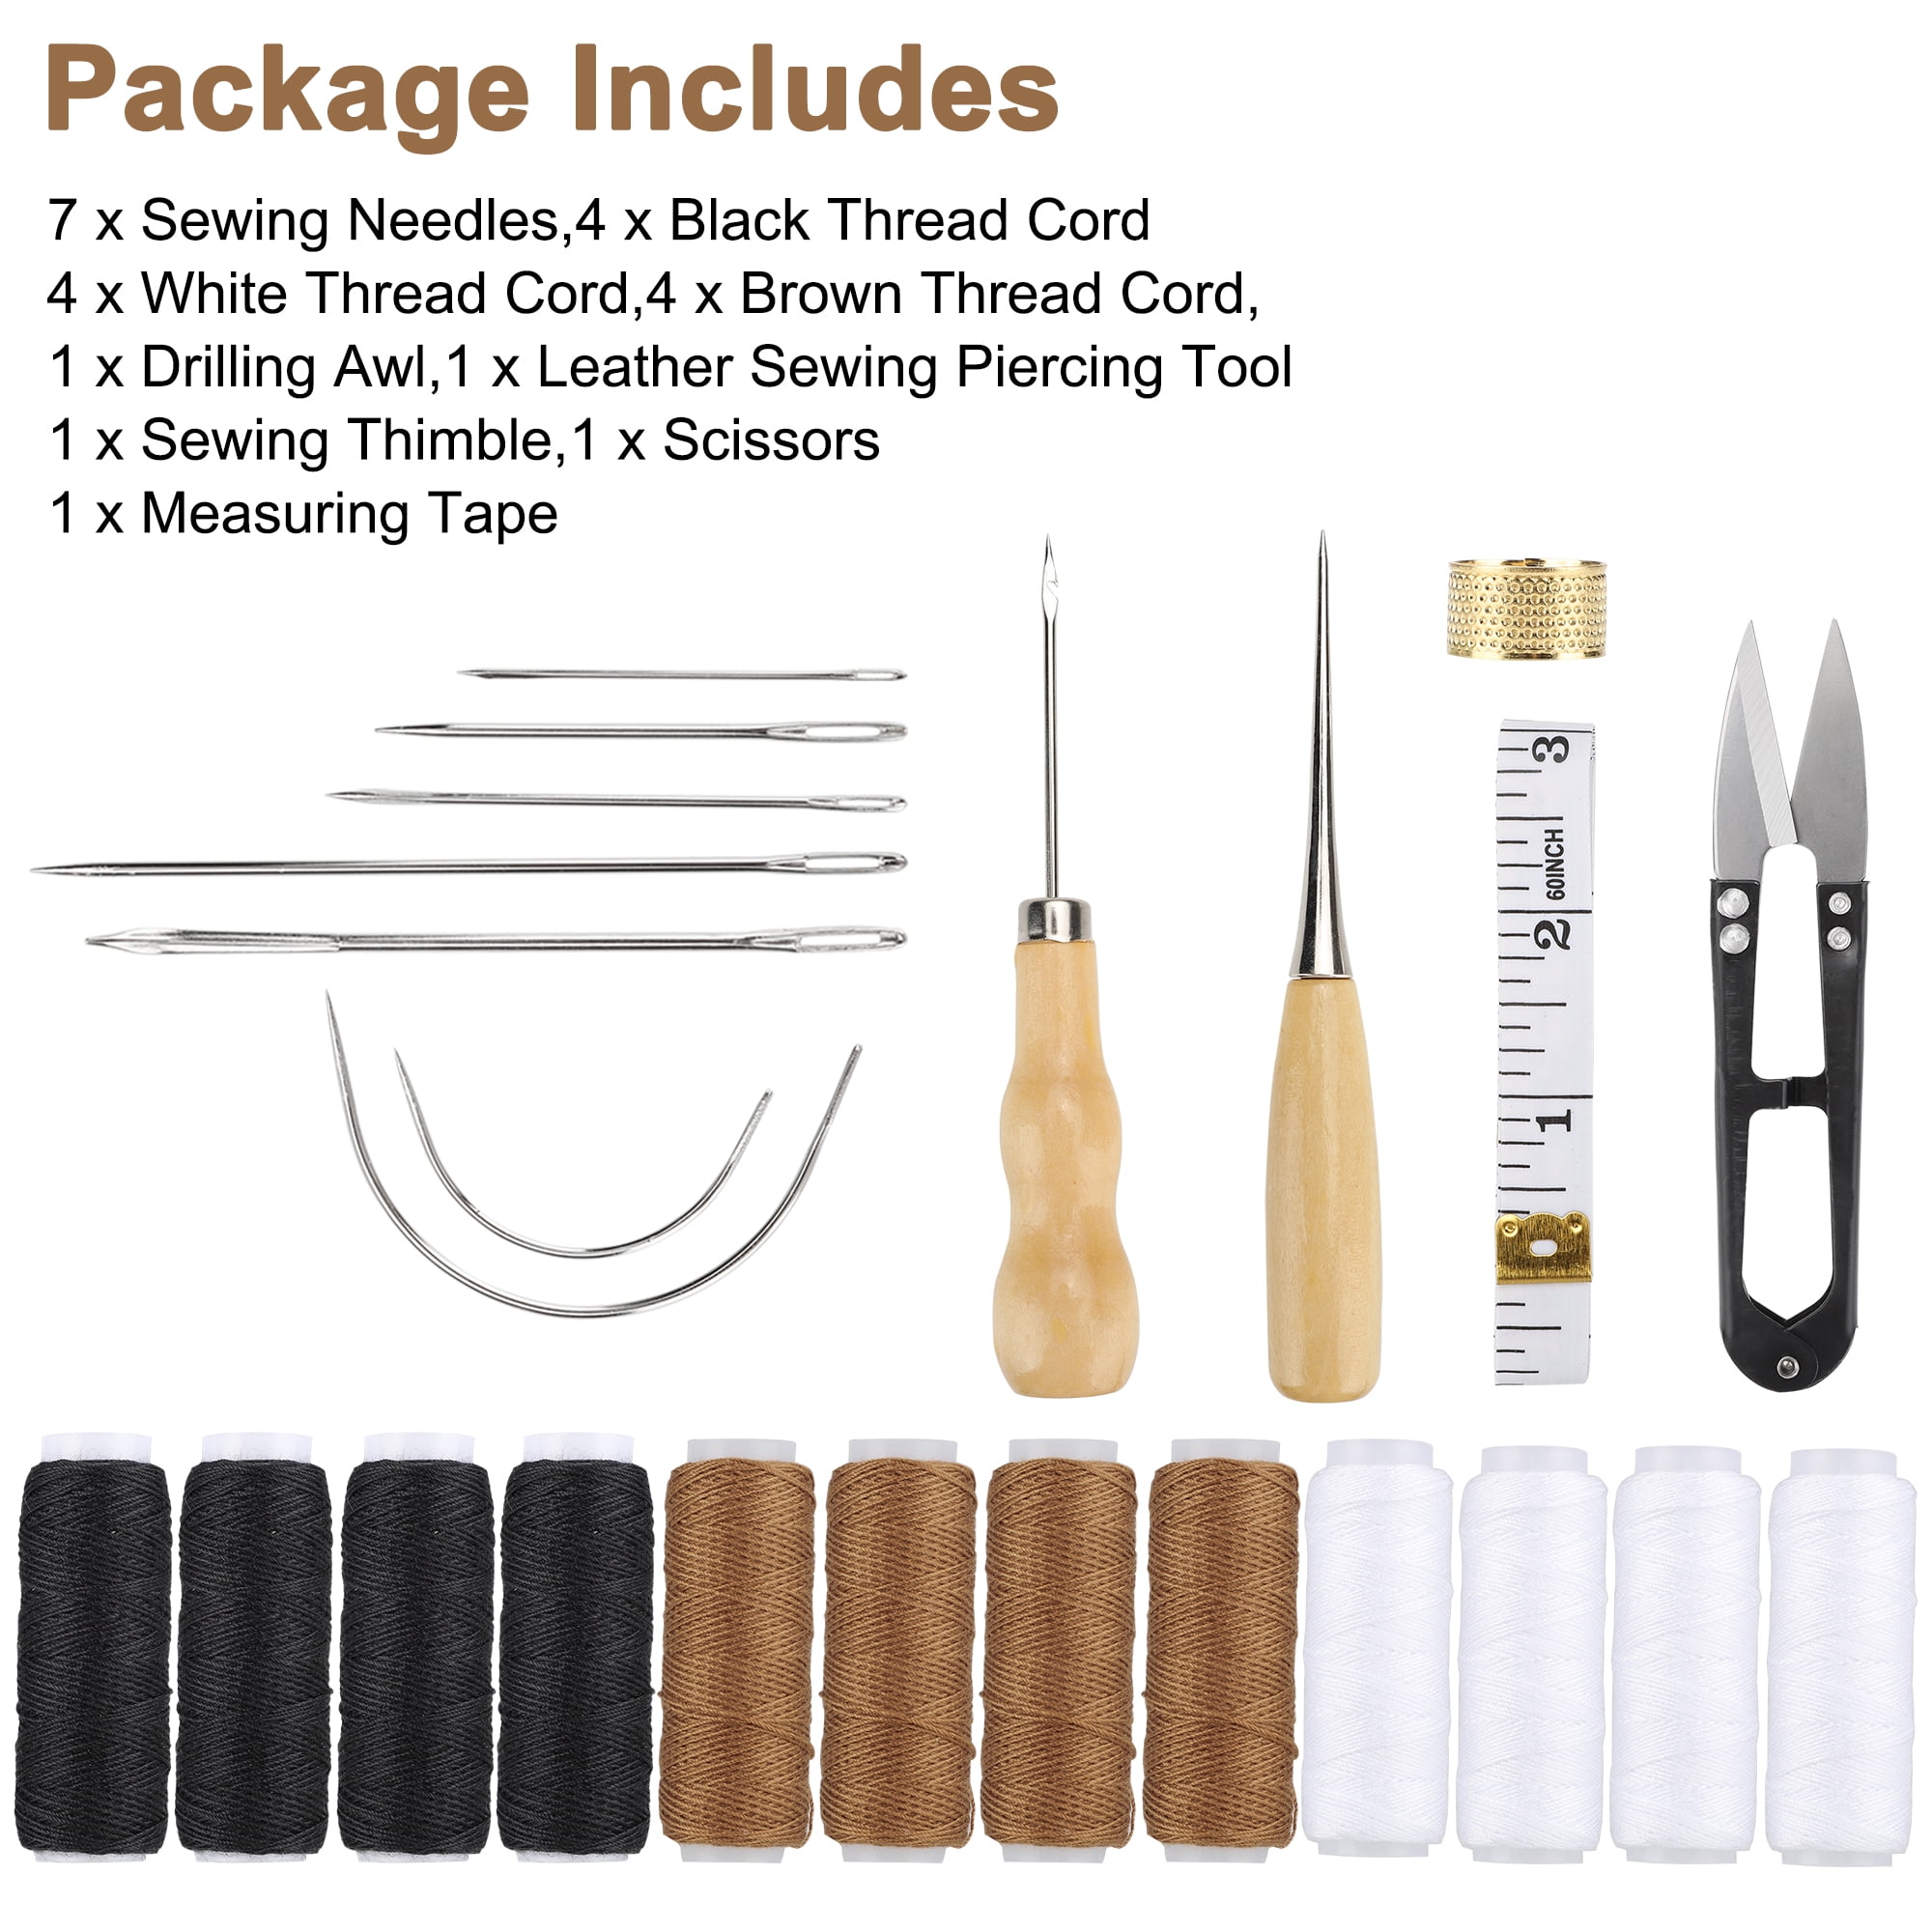 ZenBath 29pcs Leather Sewing Kit, Leather Sewing Upholstery Repair Kit,  Leather Craft Tools with 8 Colors Waxed Thread, Leather Stitching Kit for  Beginner Leather Repair, Stitching, Sewing 